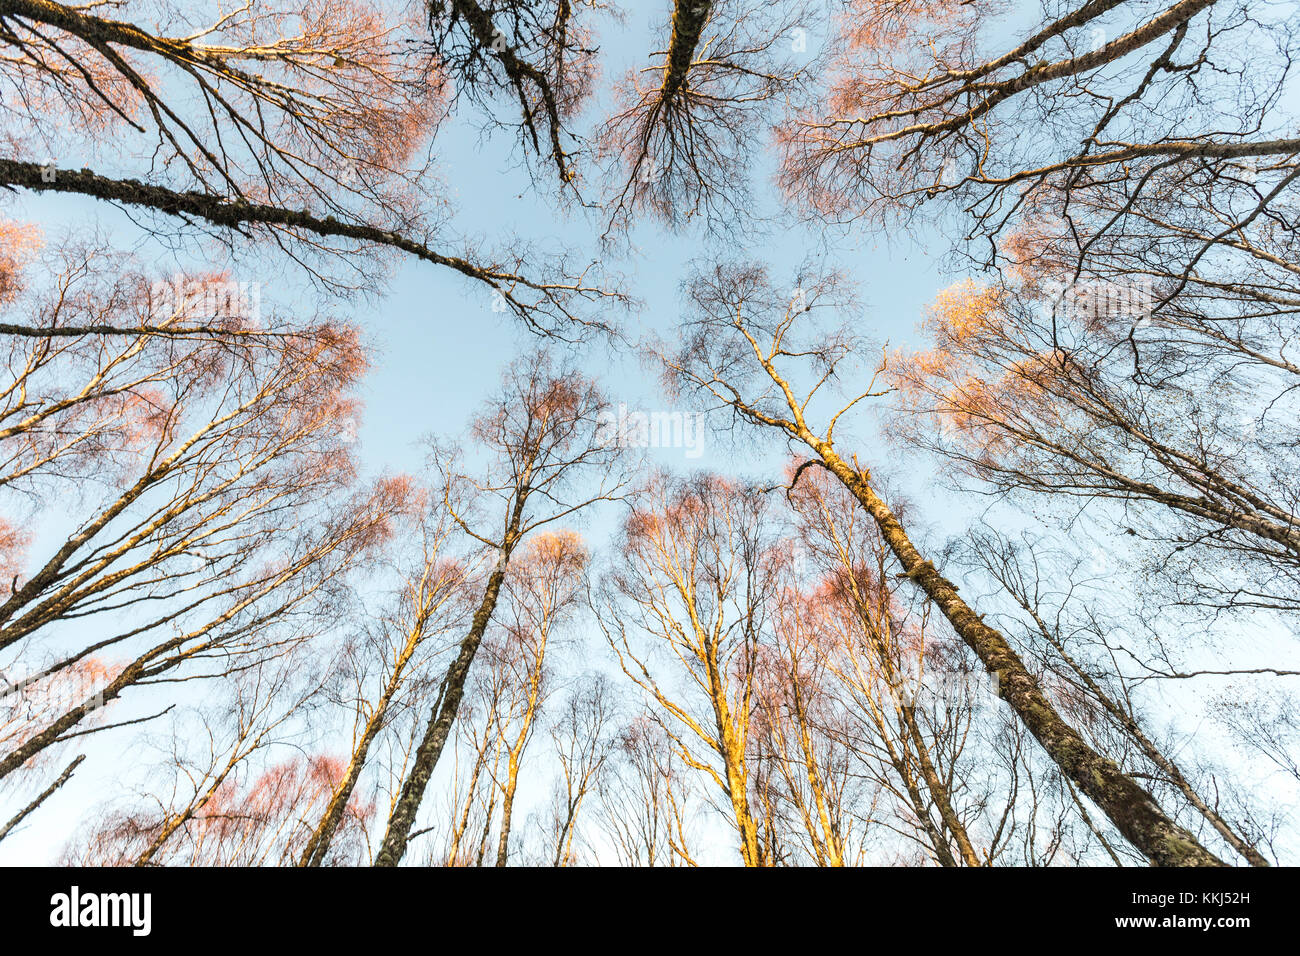 Canopy of Birch trees in Autumn in the Cairngorms National Park. Stock Photo